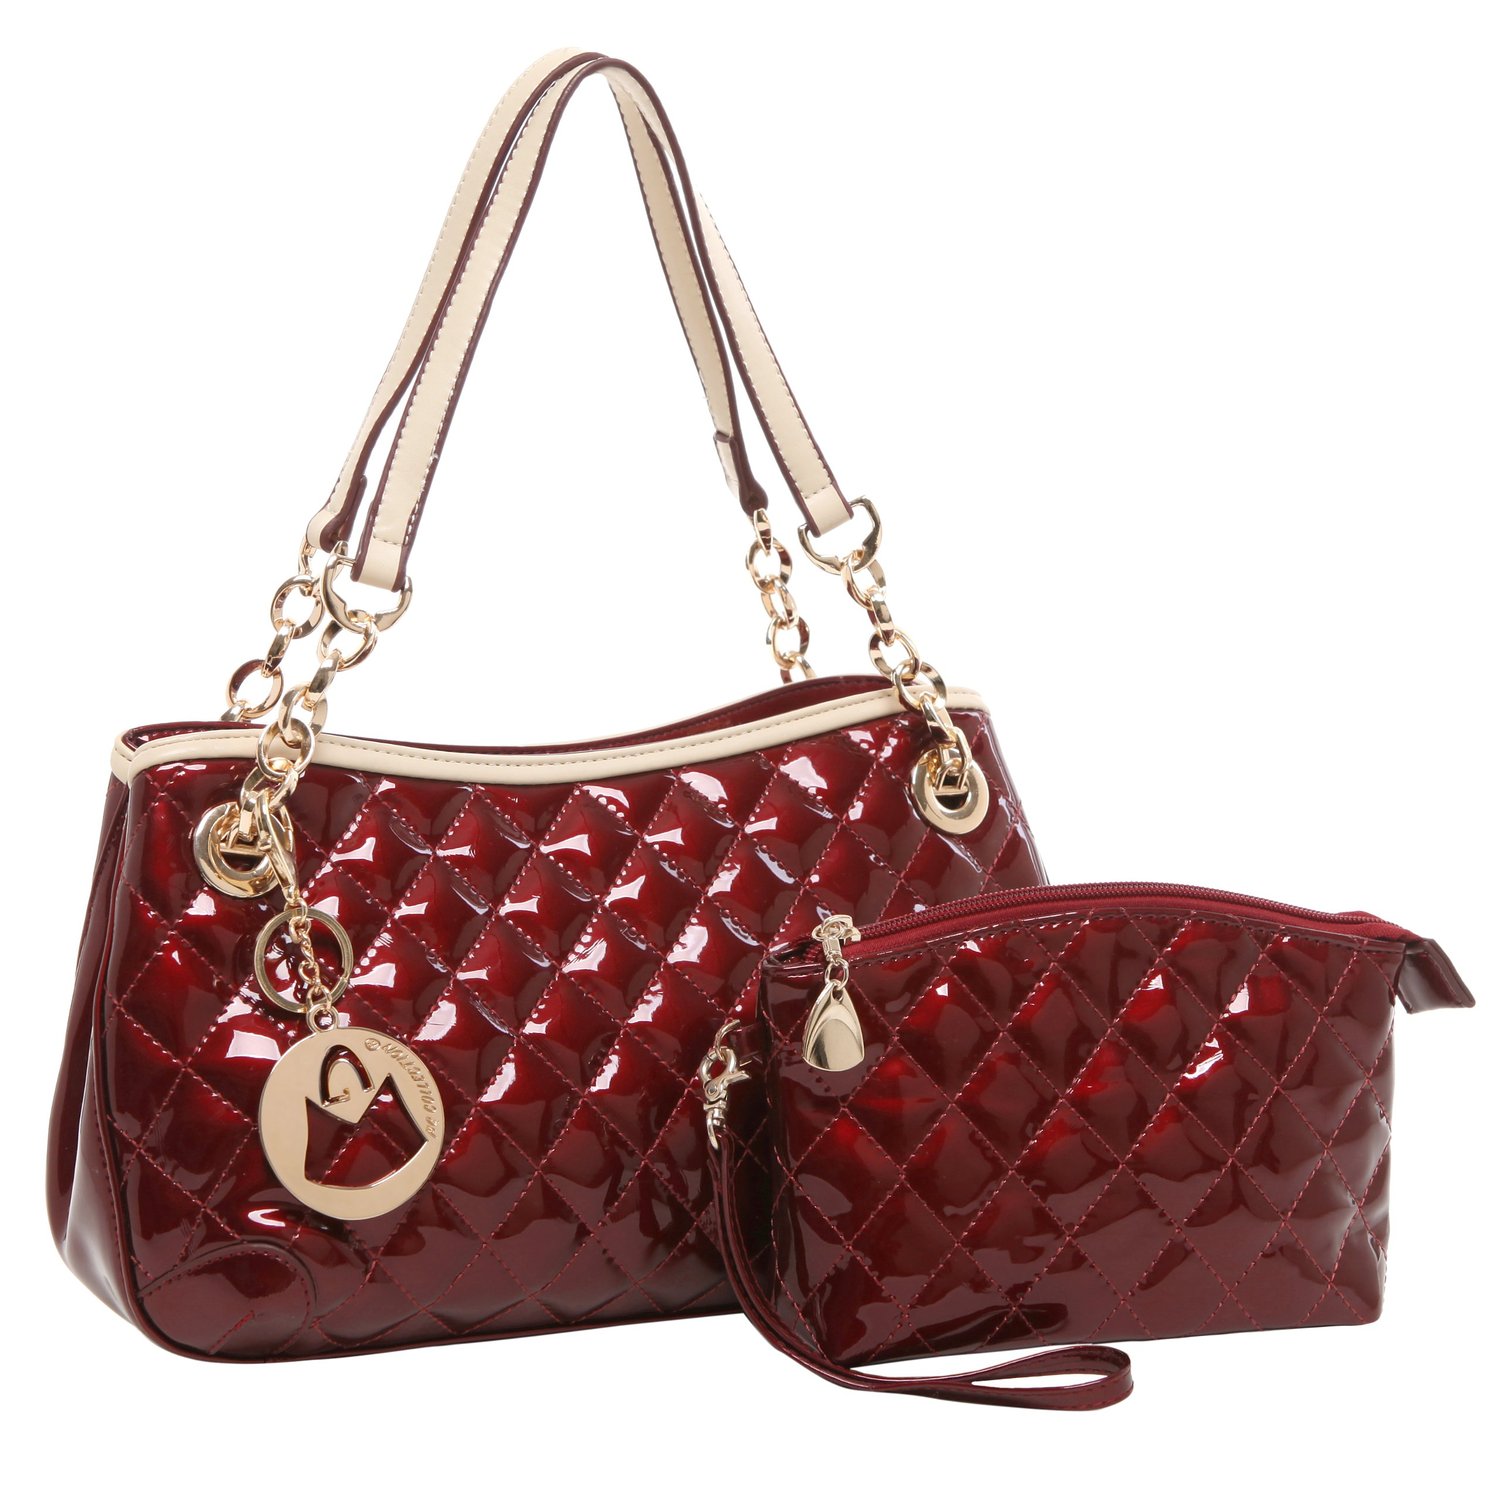 MG Collection ELISE 2 in 1 Stylish Quilted Faux Patent Leather Purse Handbag - www.bagssaleusa.com